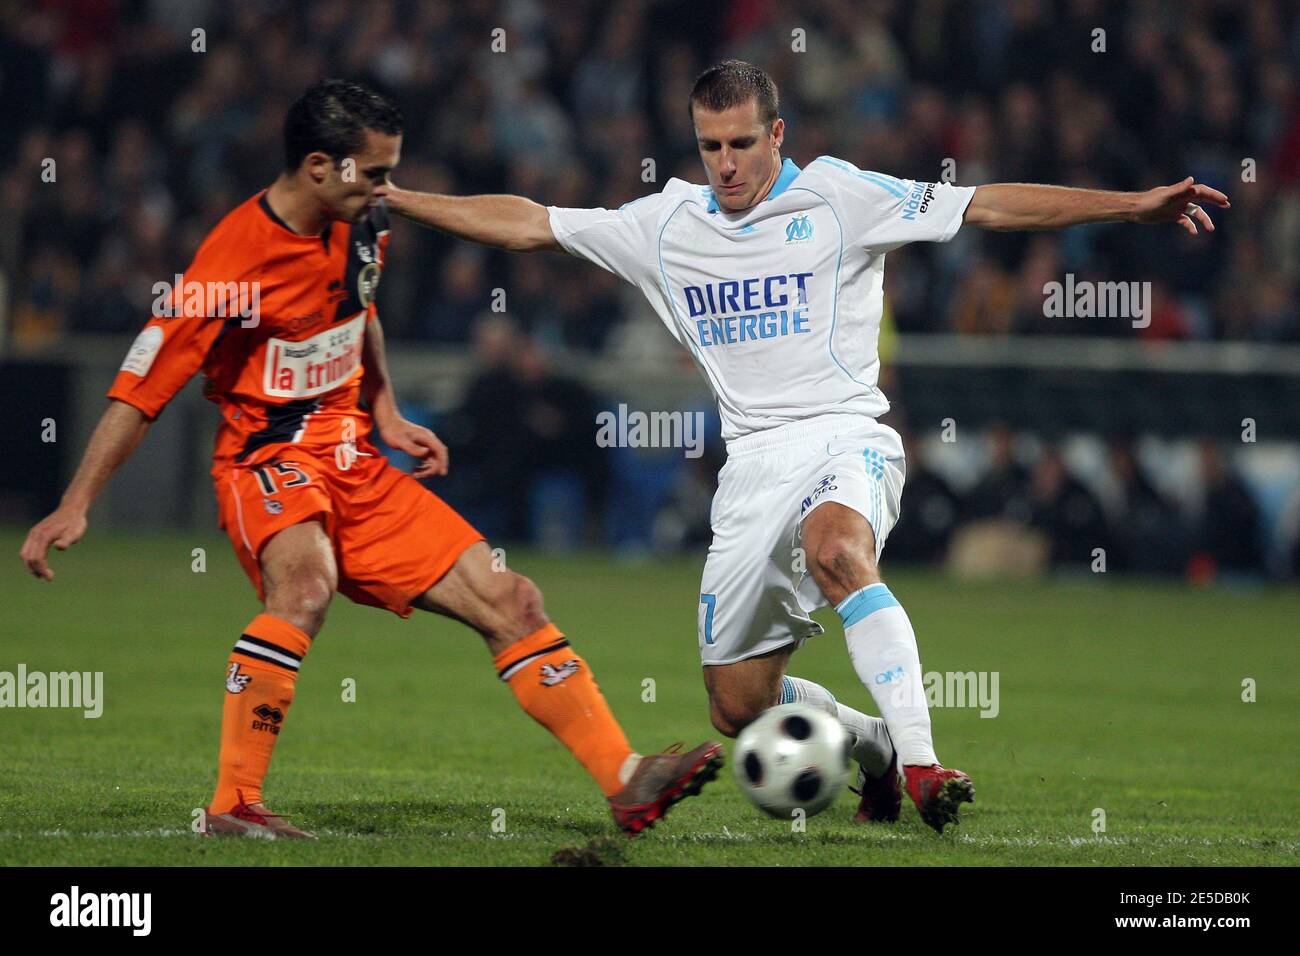 Marseille's Benoit Cheyrou during French First League Soccer match,  Olympique de Marseille vs FC Lorient at the Stade Velodrome in Marseille,  France on November 15, 2008. Lorient won 3-2. Photo by Stuart